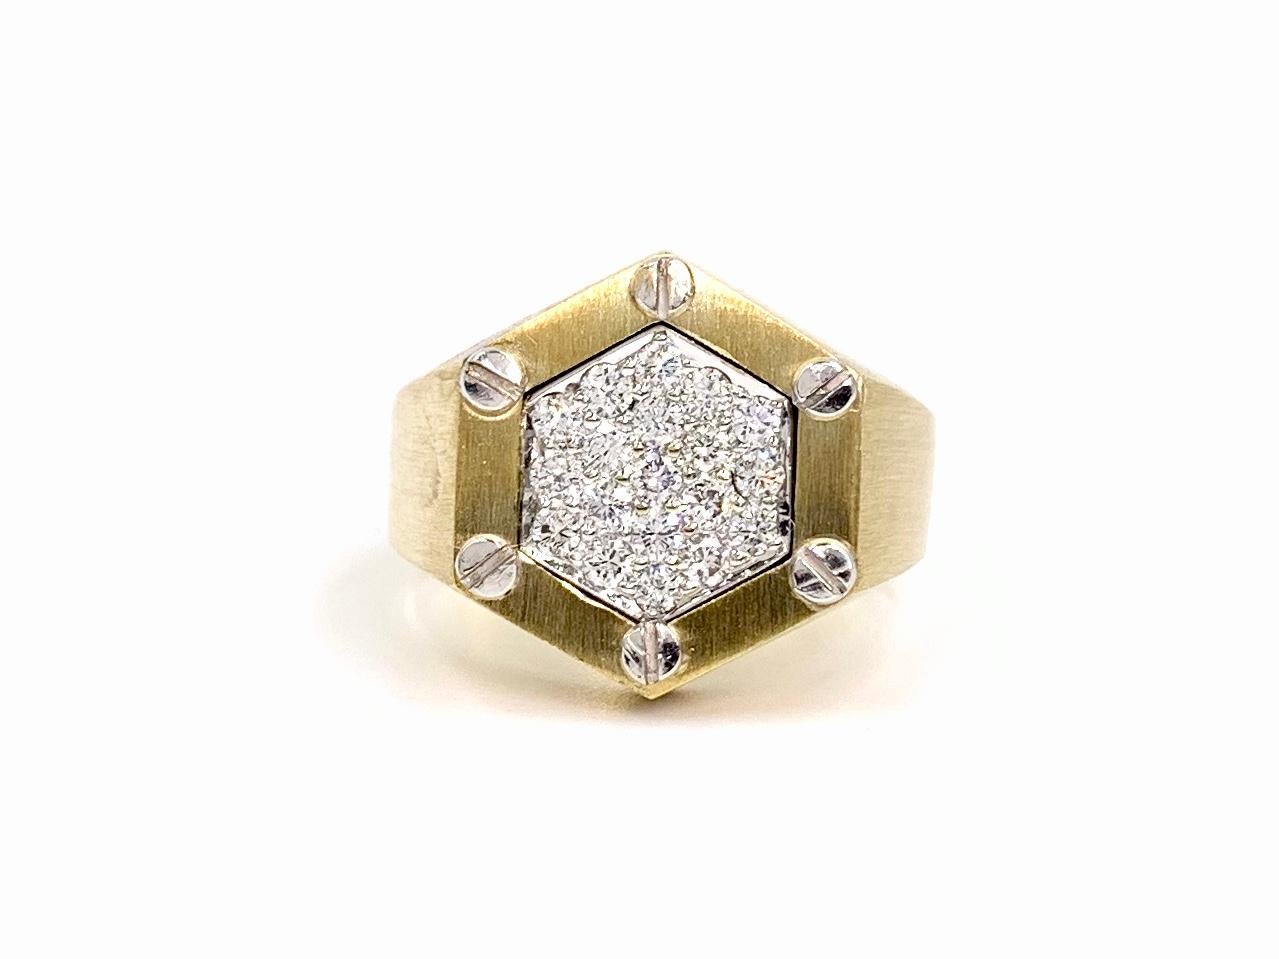 Well crafted genuine La Triomphe 18 karat two tone hexagon shaped gold ring featuring .55 carats of round brilliant high quality diamonds. Diamonds are approximately F color, VS2 clarity. Diamonds are set with white gold prongs for an extra bright